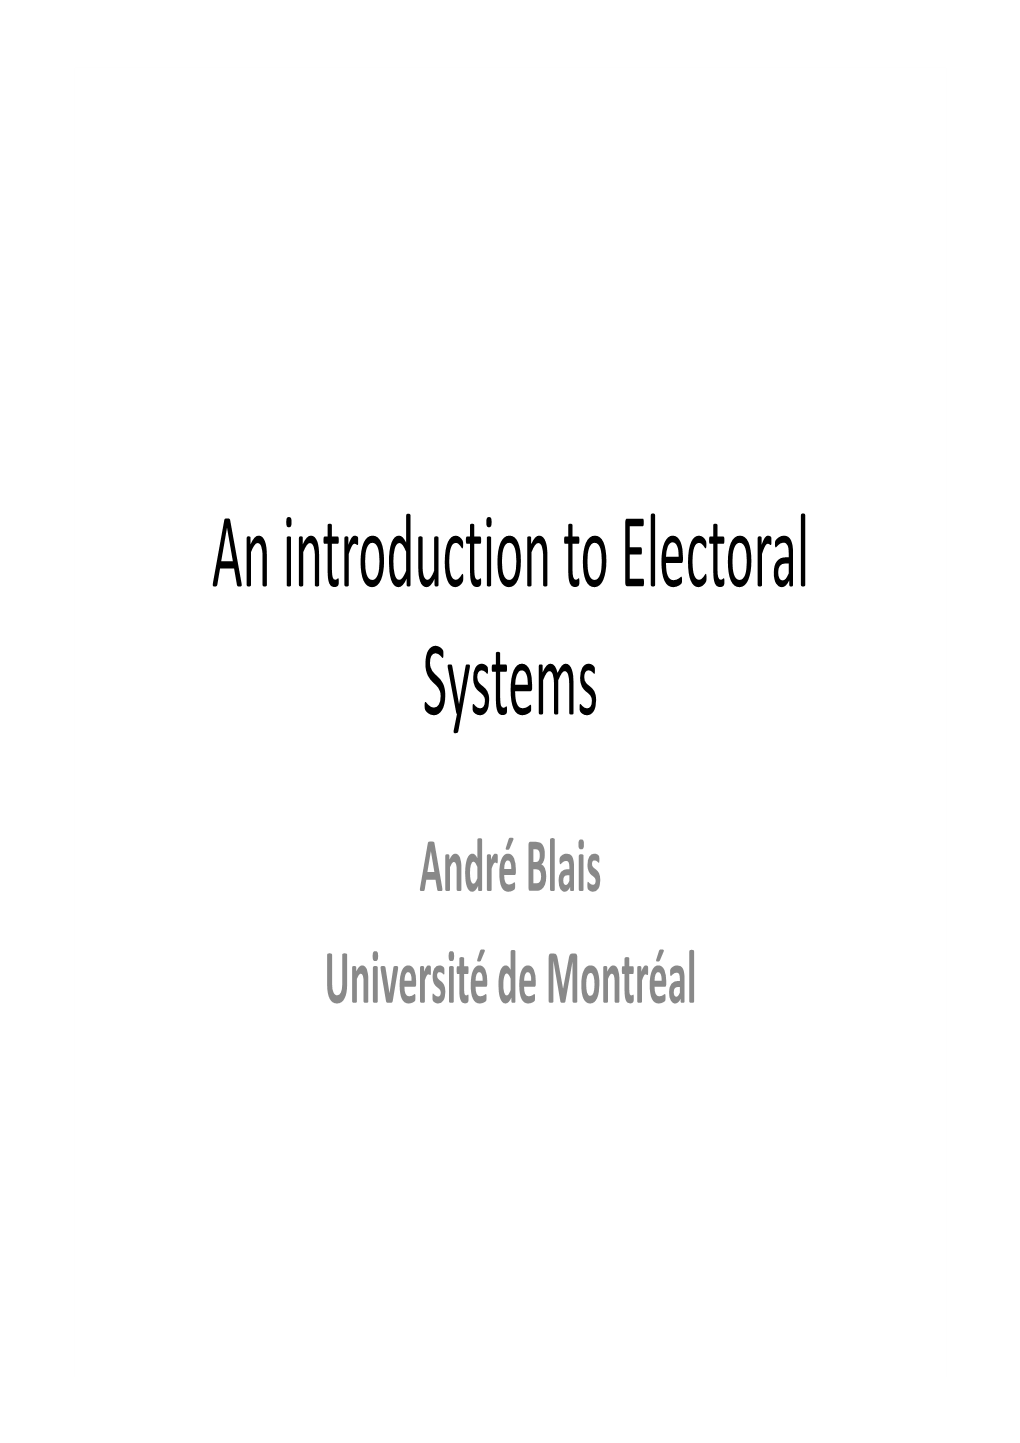 An Introduction to Electoral Systems